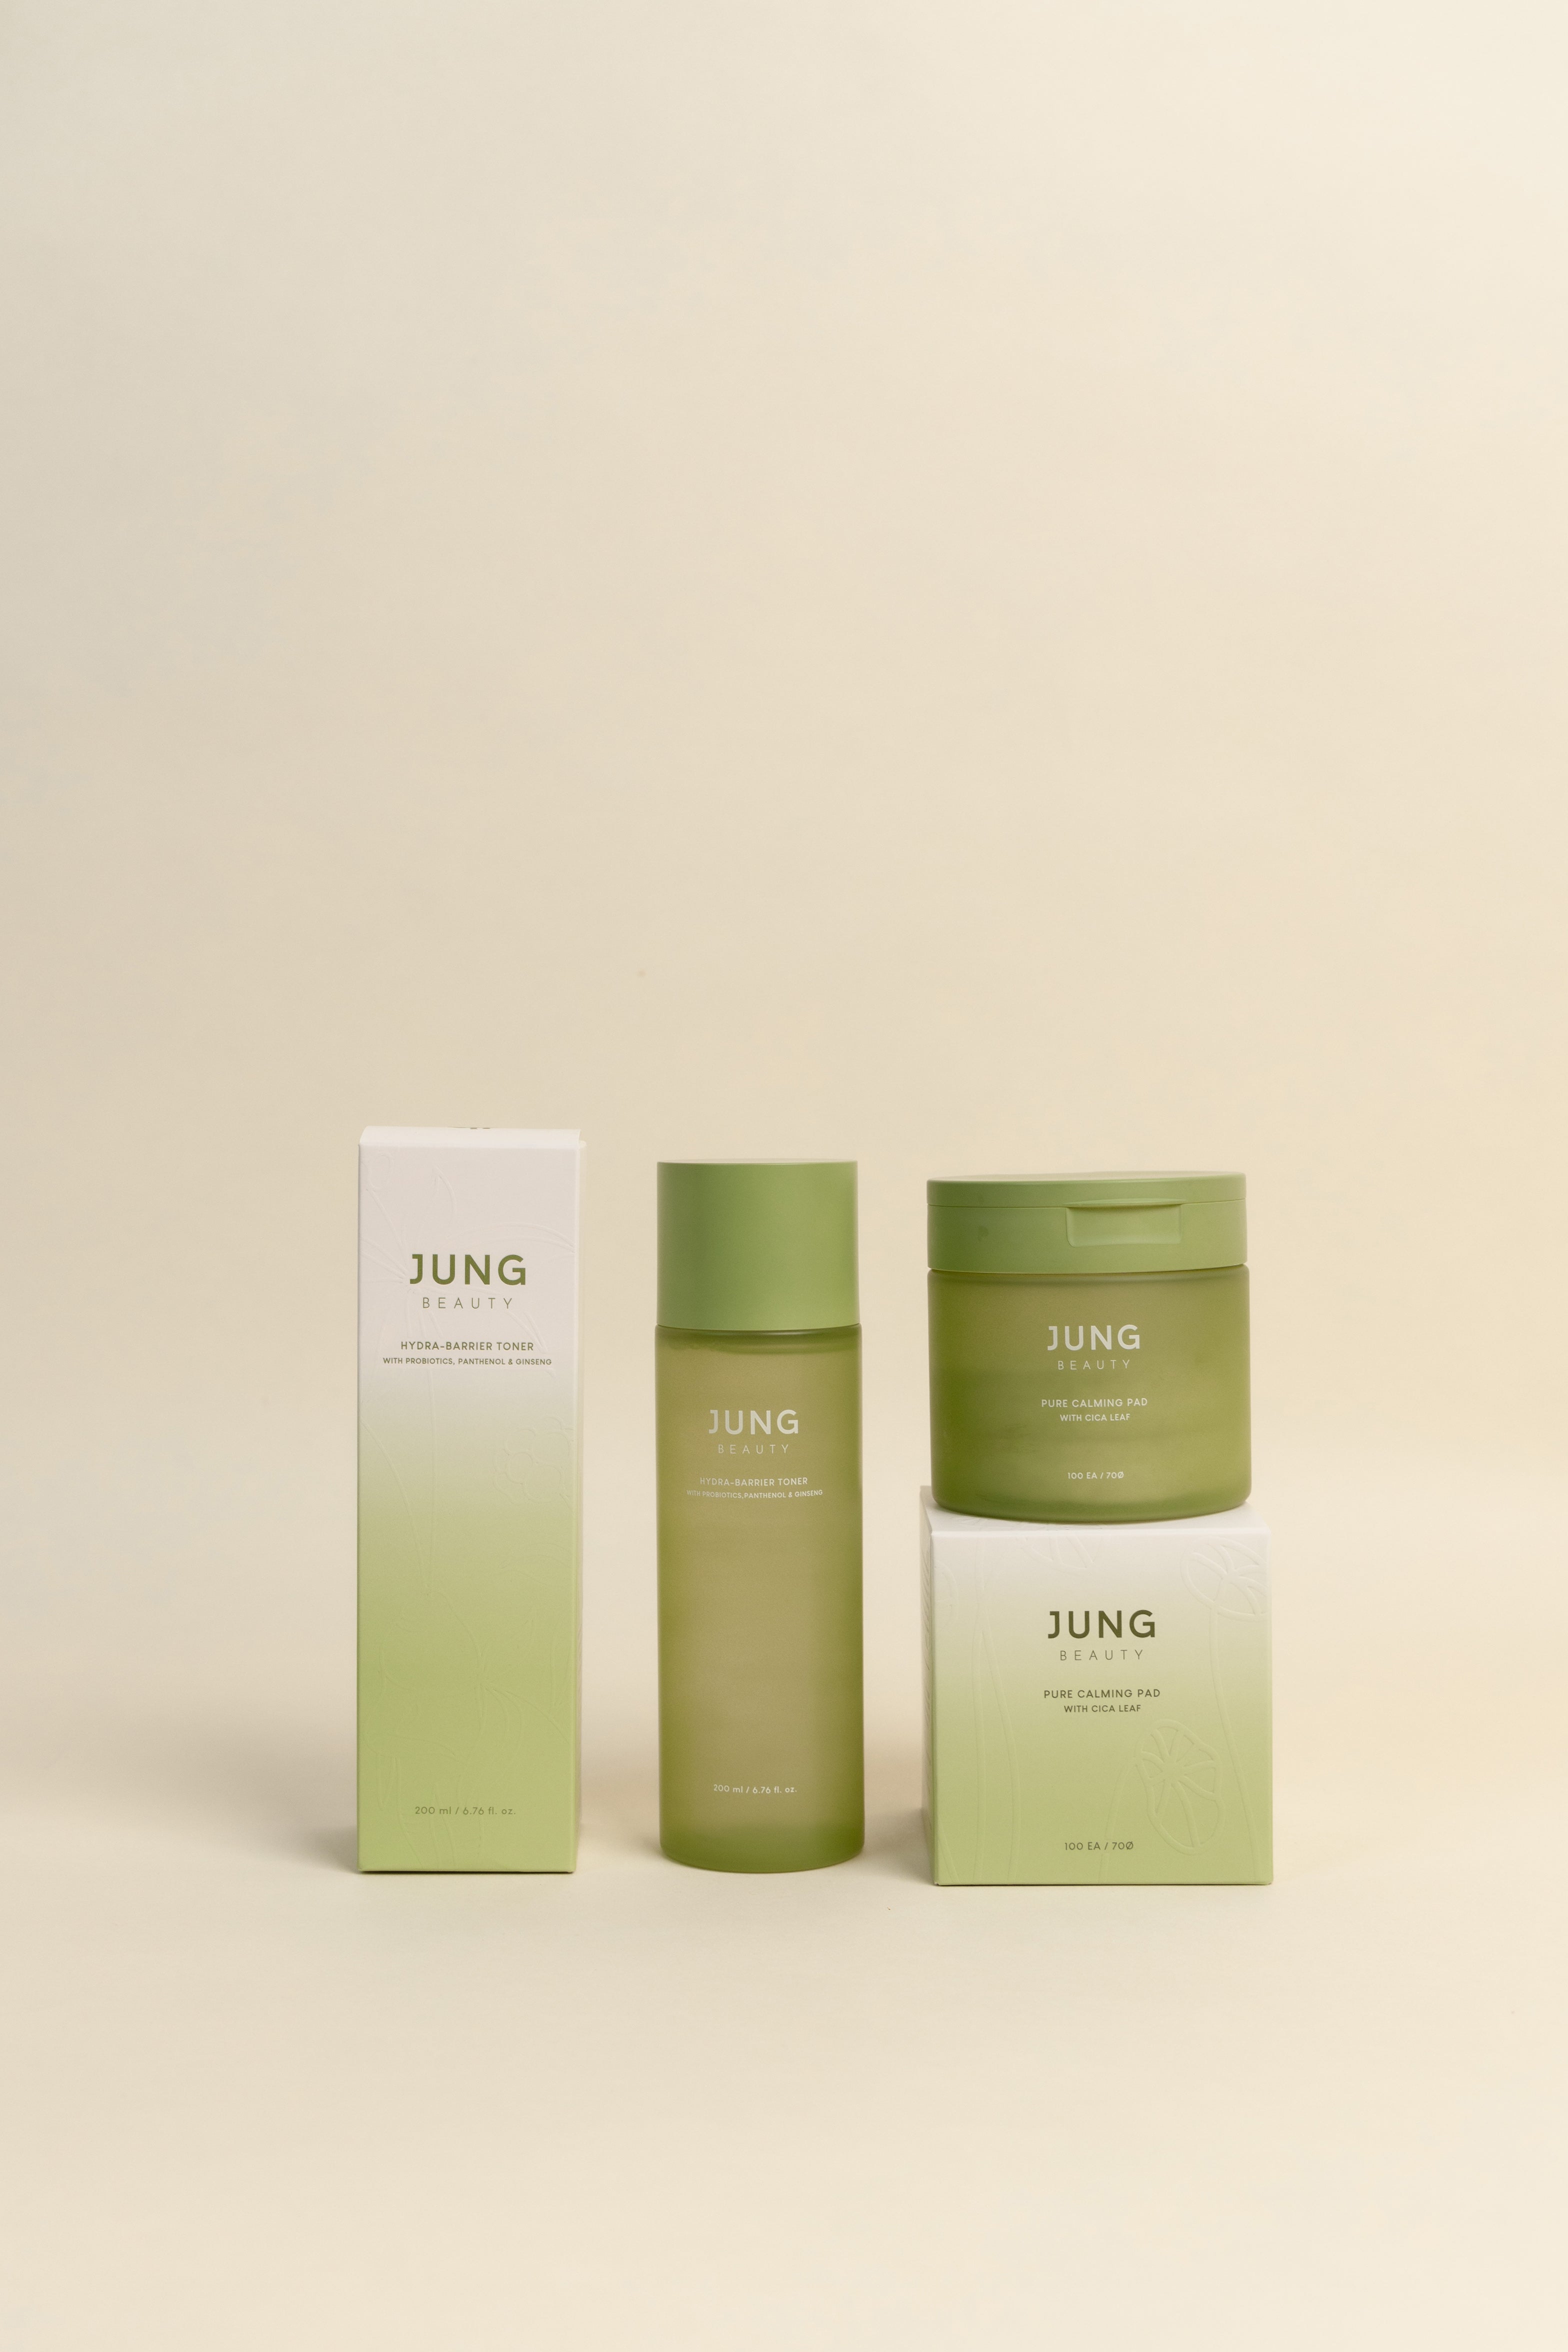 PROMO] Jung Beauty Hydra-Barrier Toner with Probiotics, Panthenol